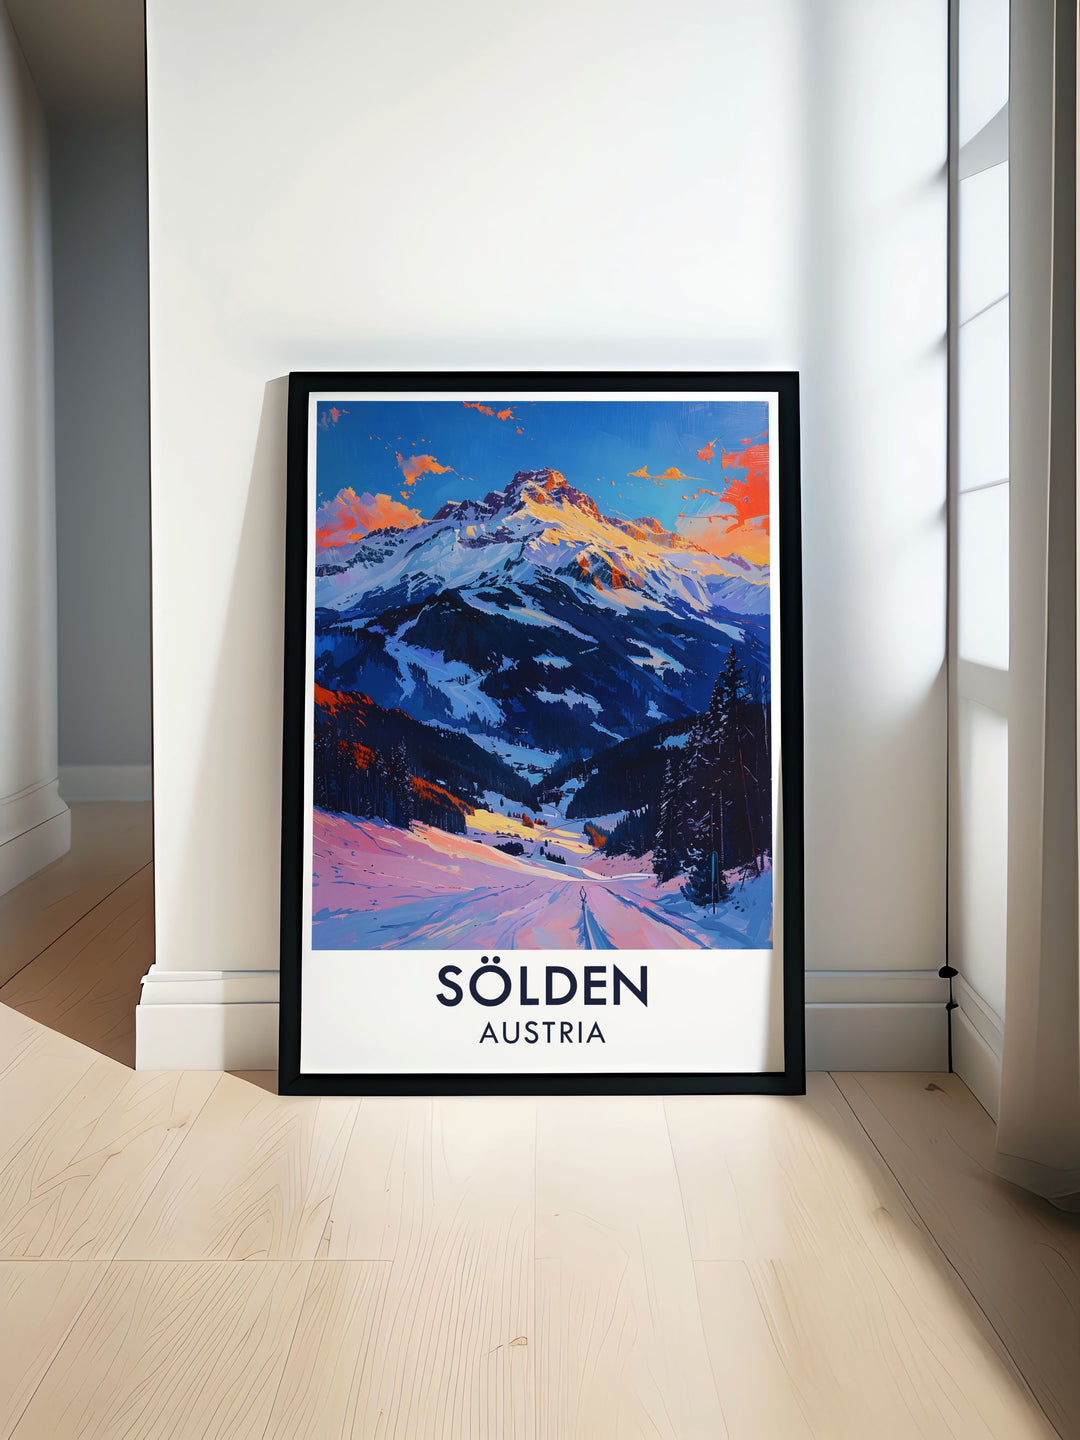 Bring the beauty of Solden into your home with this detailed poster, highlighting the excitement of snowboarding and the serene alpine scenery of Gaislachkogl Peak.